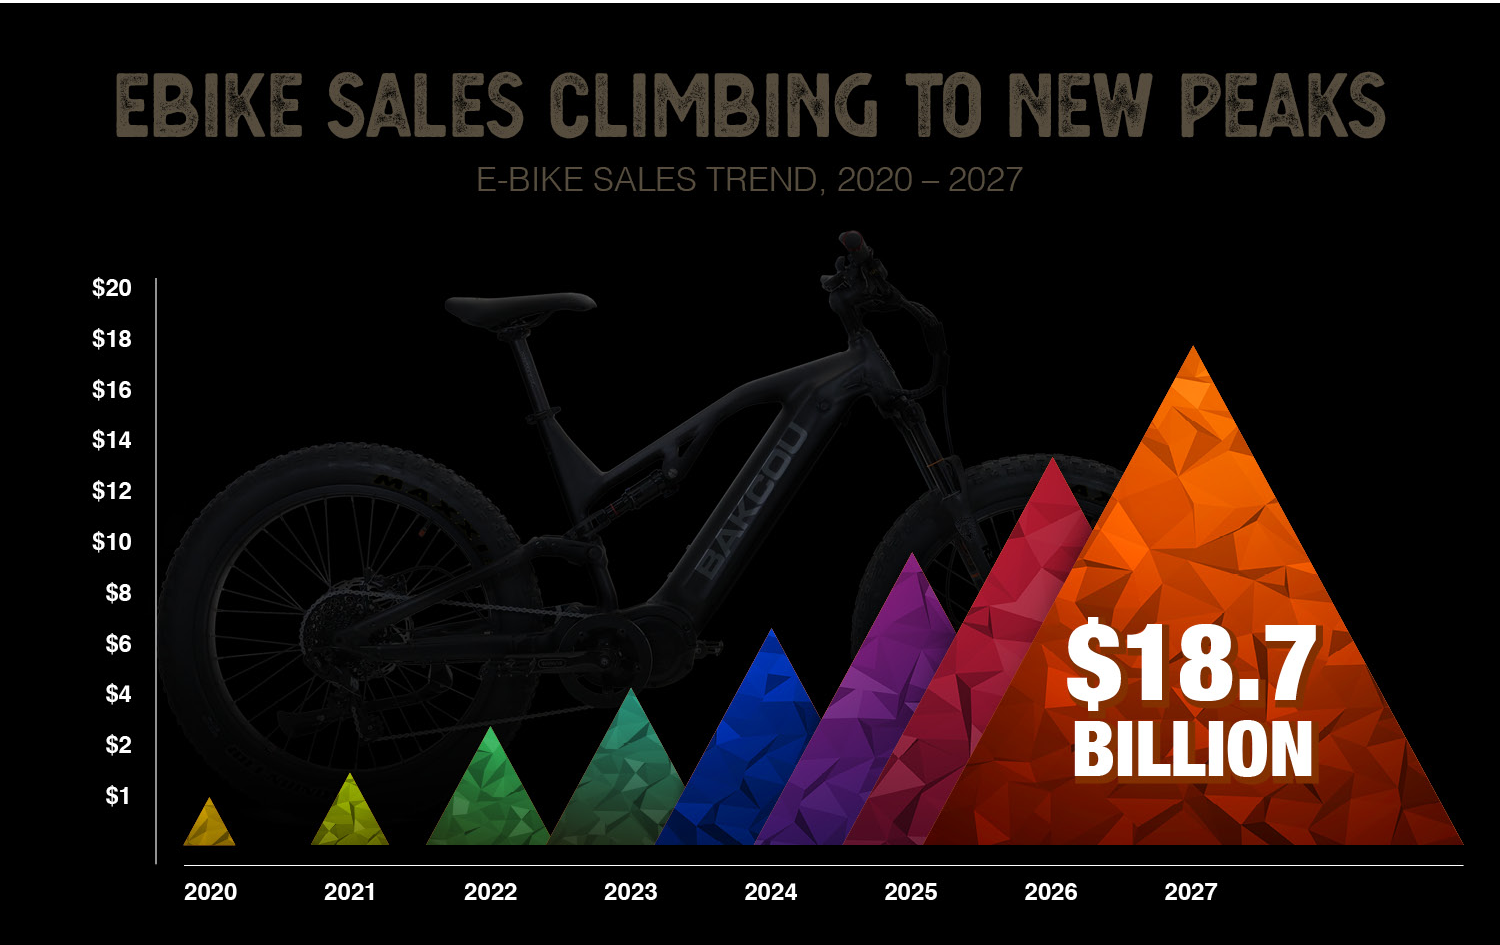 Ebike and Fat Tire Ebike Sales Are Climbing to New Peaks, Sales Are Expected to Reach $18.7 BILLION DOLLARS by 2027